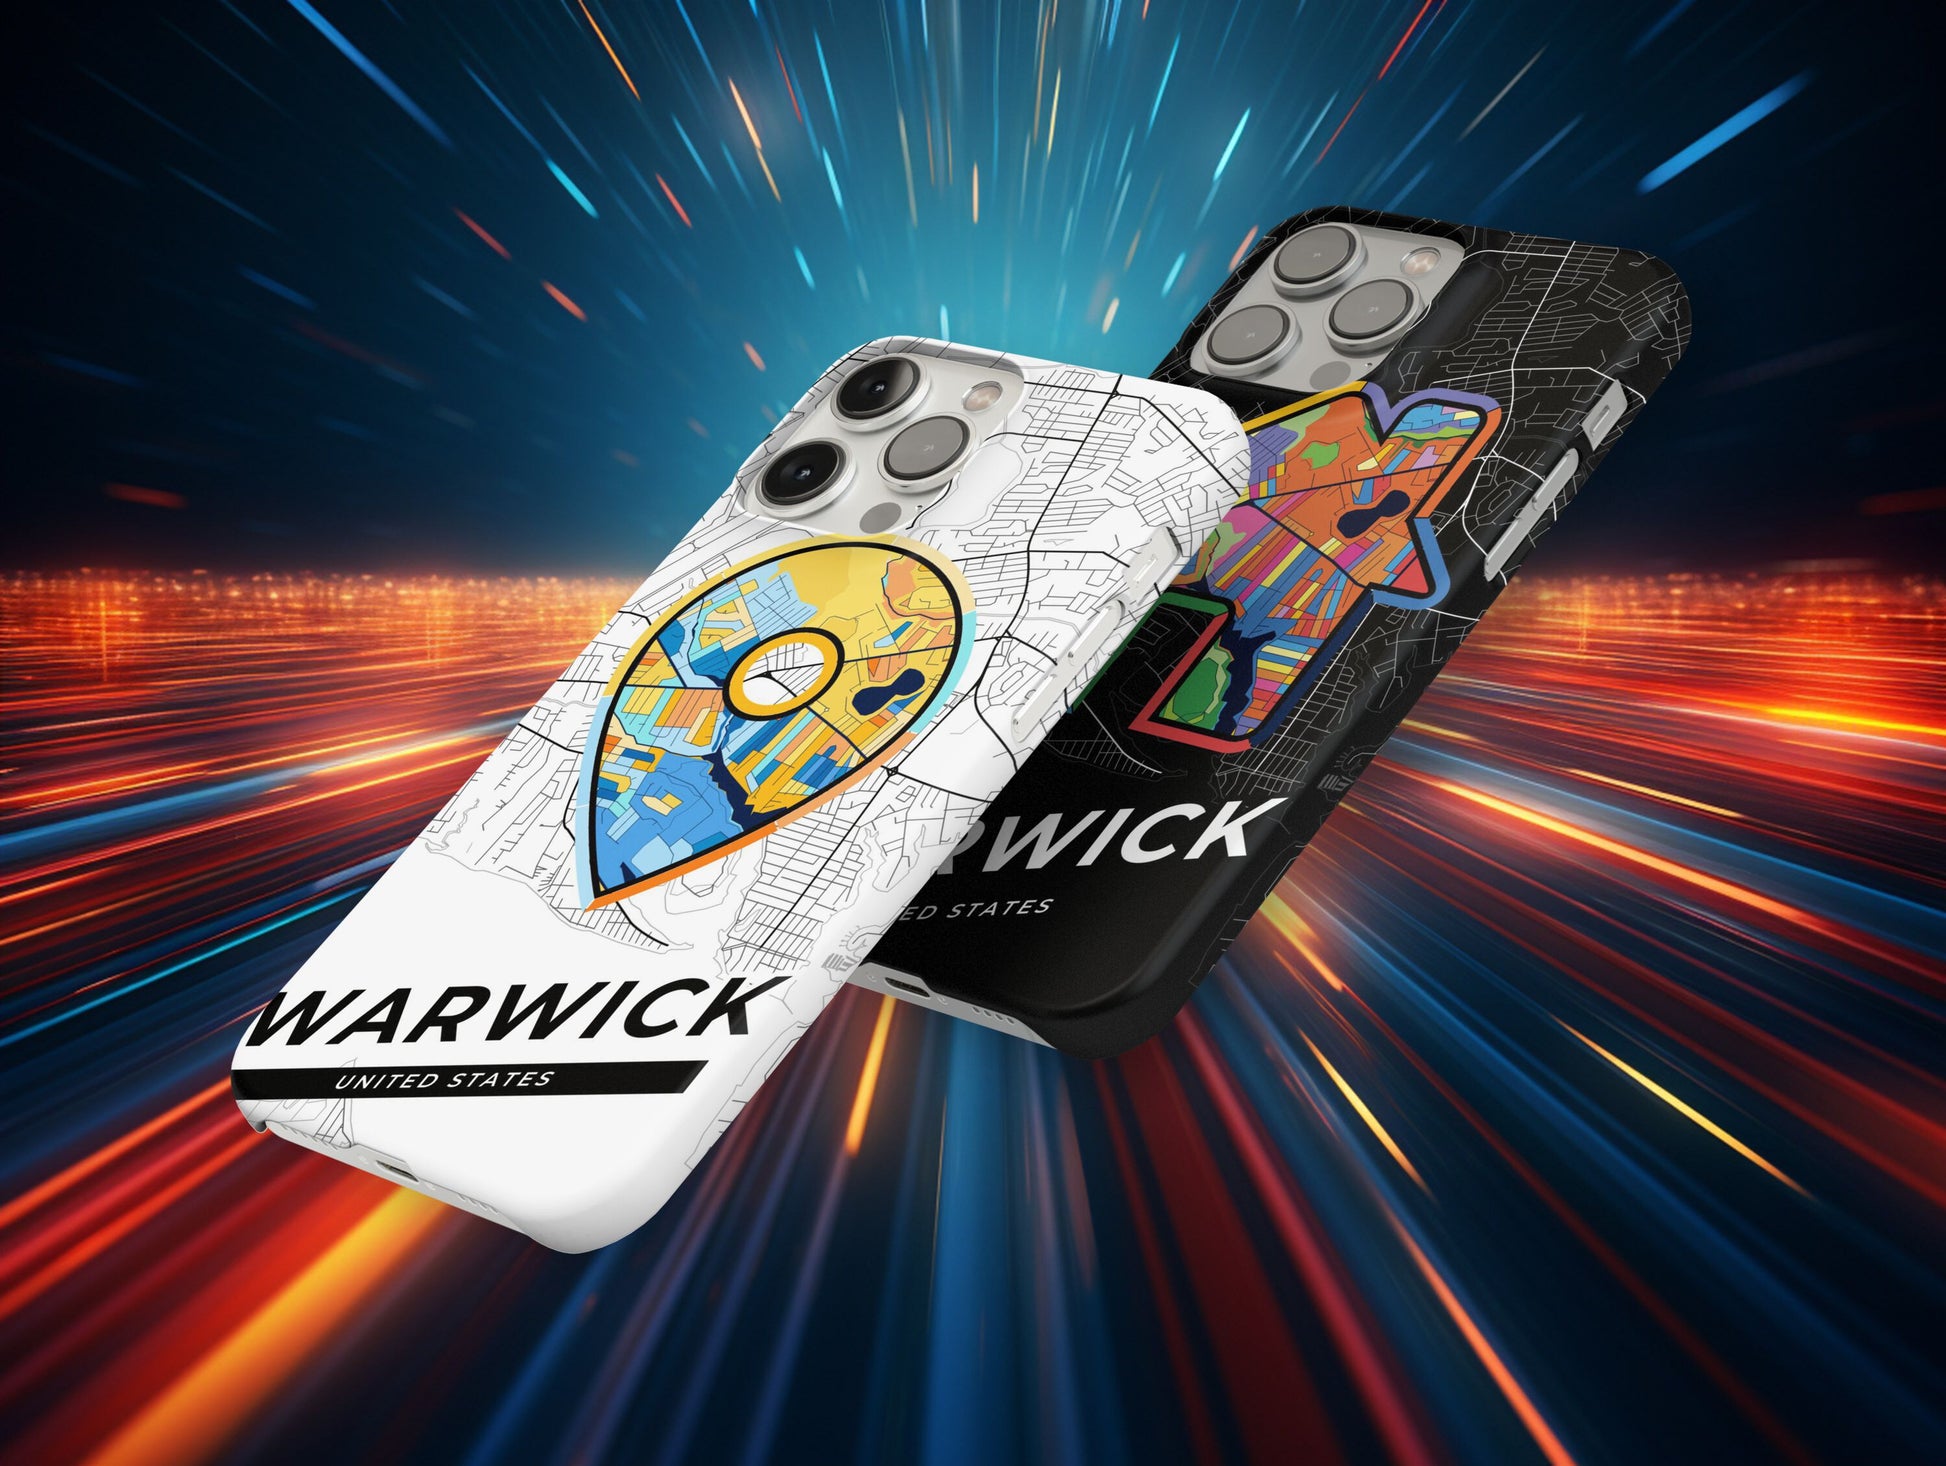 Warwick Rhode Island slim phone case with colorful icon